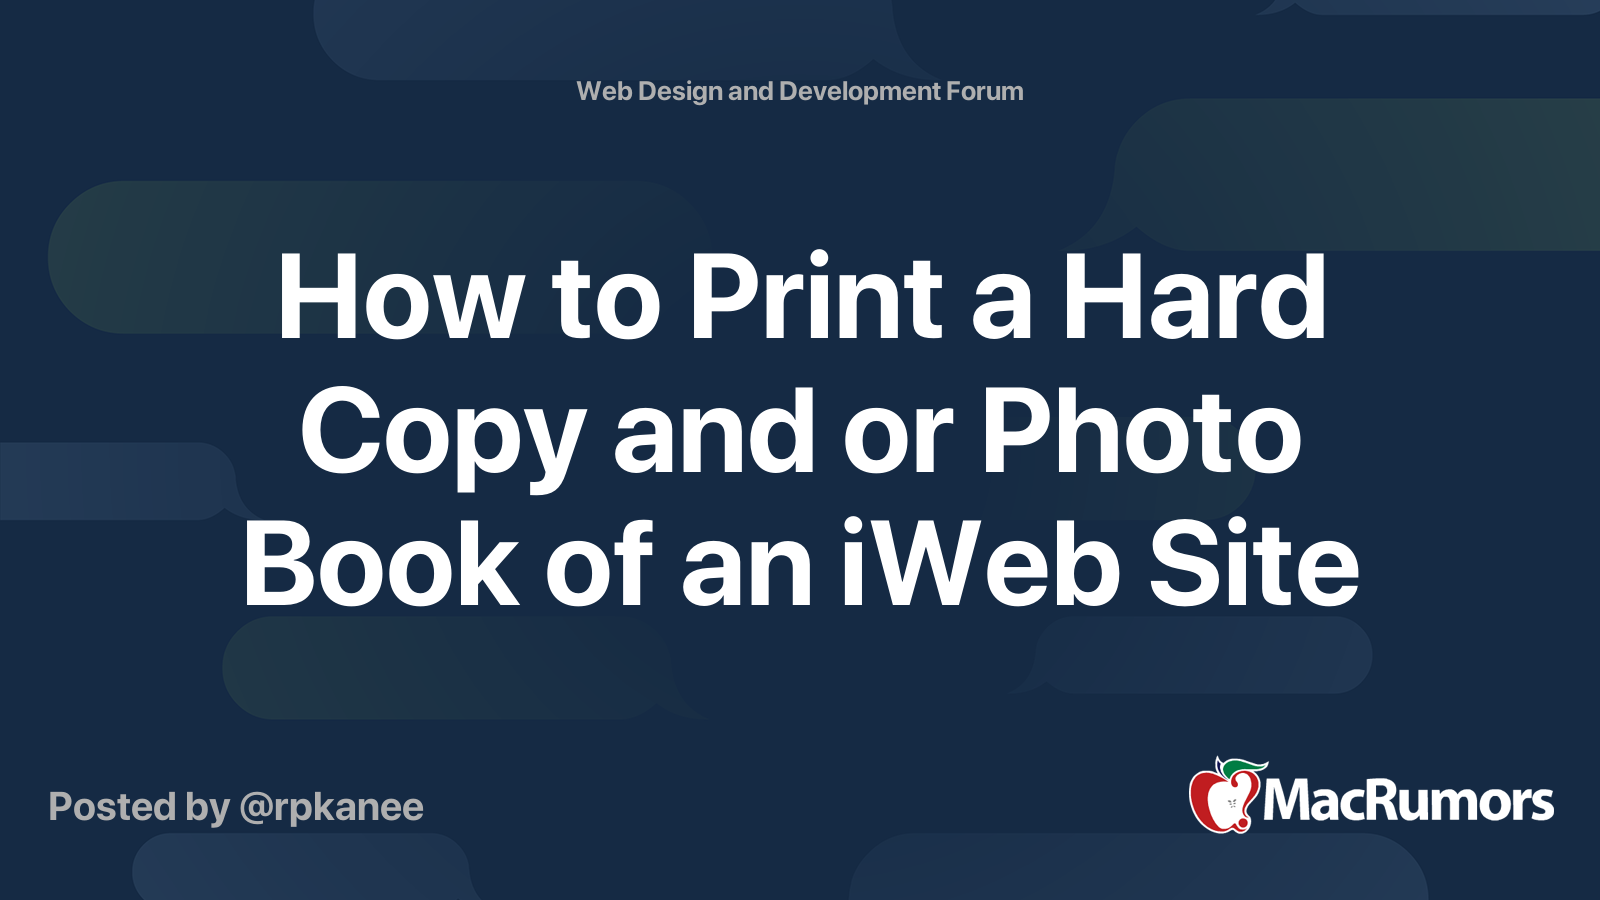 how-to-print-a-hard-copy-and-or-photo-book-of-an-iweb-site-macrumors